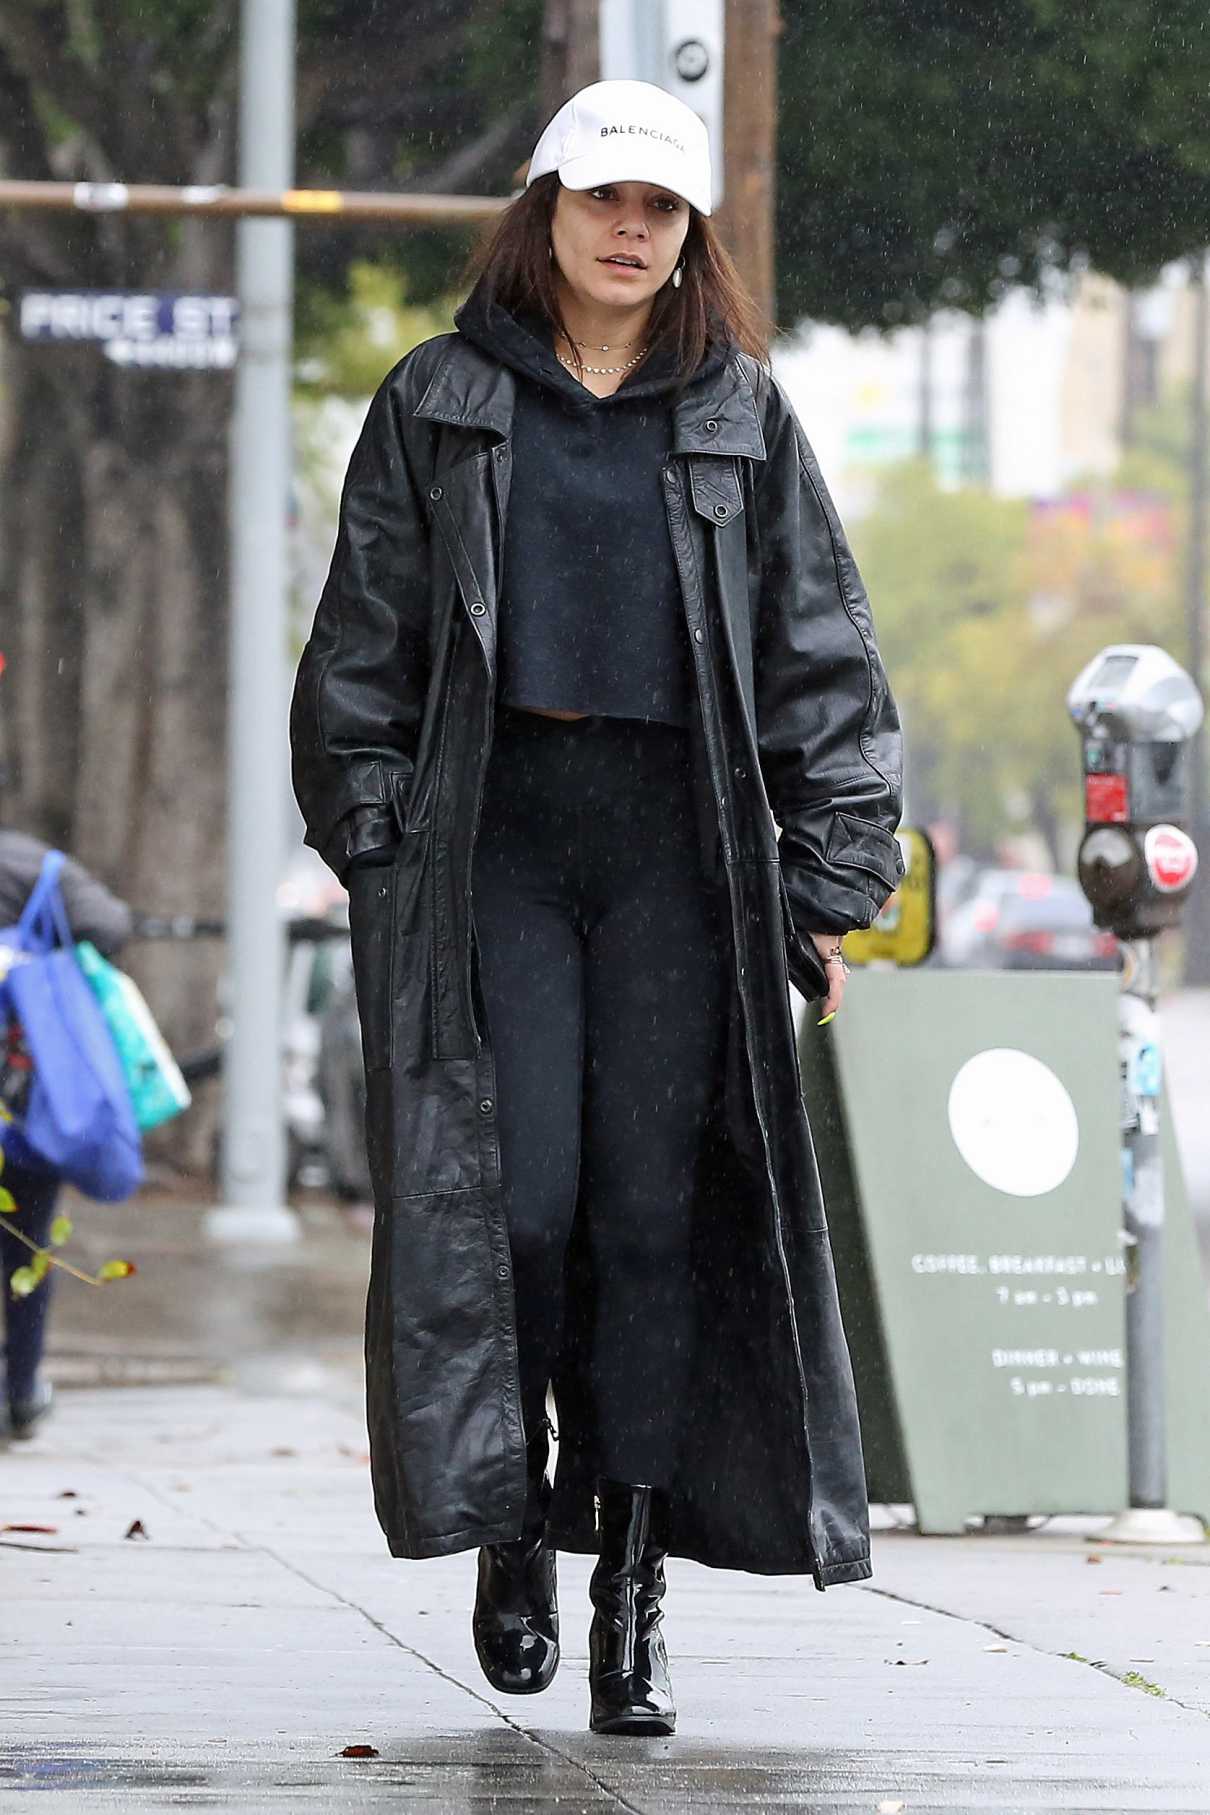 Vanessa Hudgens in a Black Leather Coat Braves the Rain in Los Angeles ...